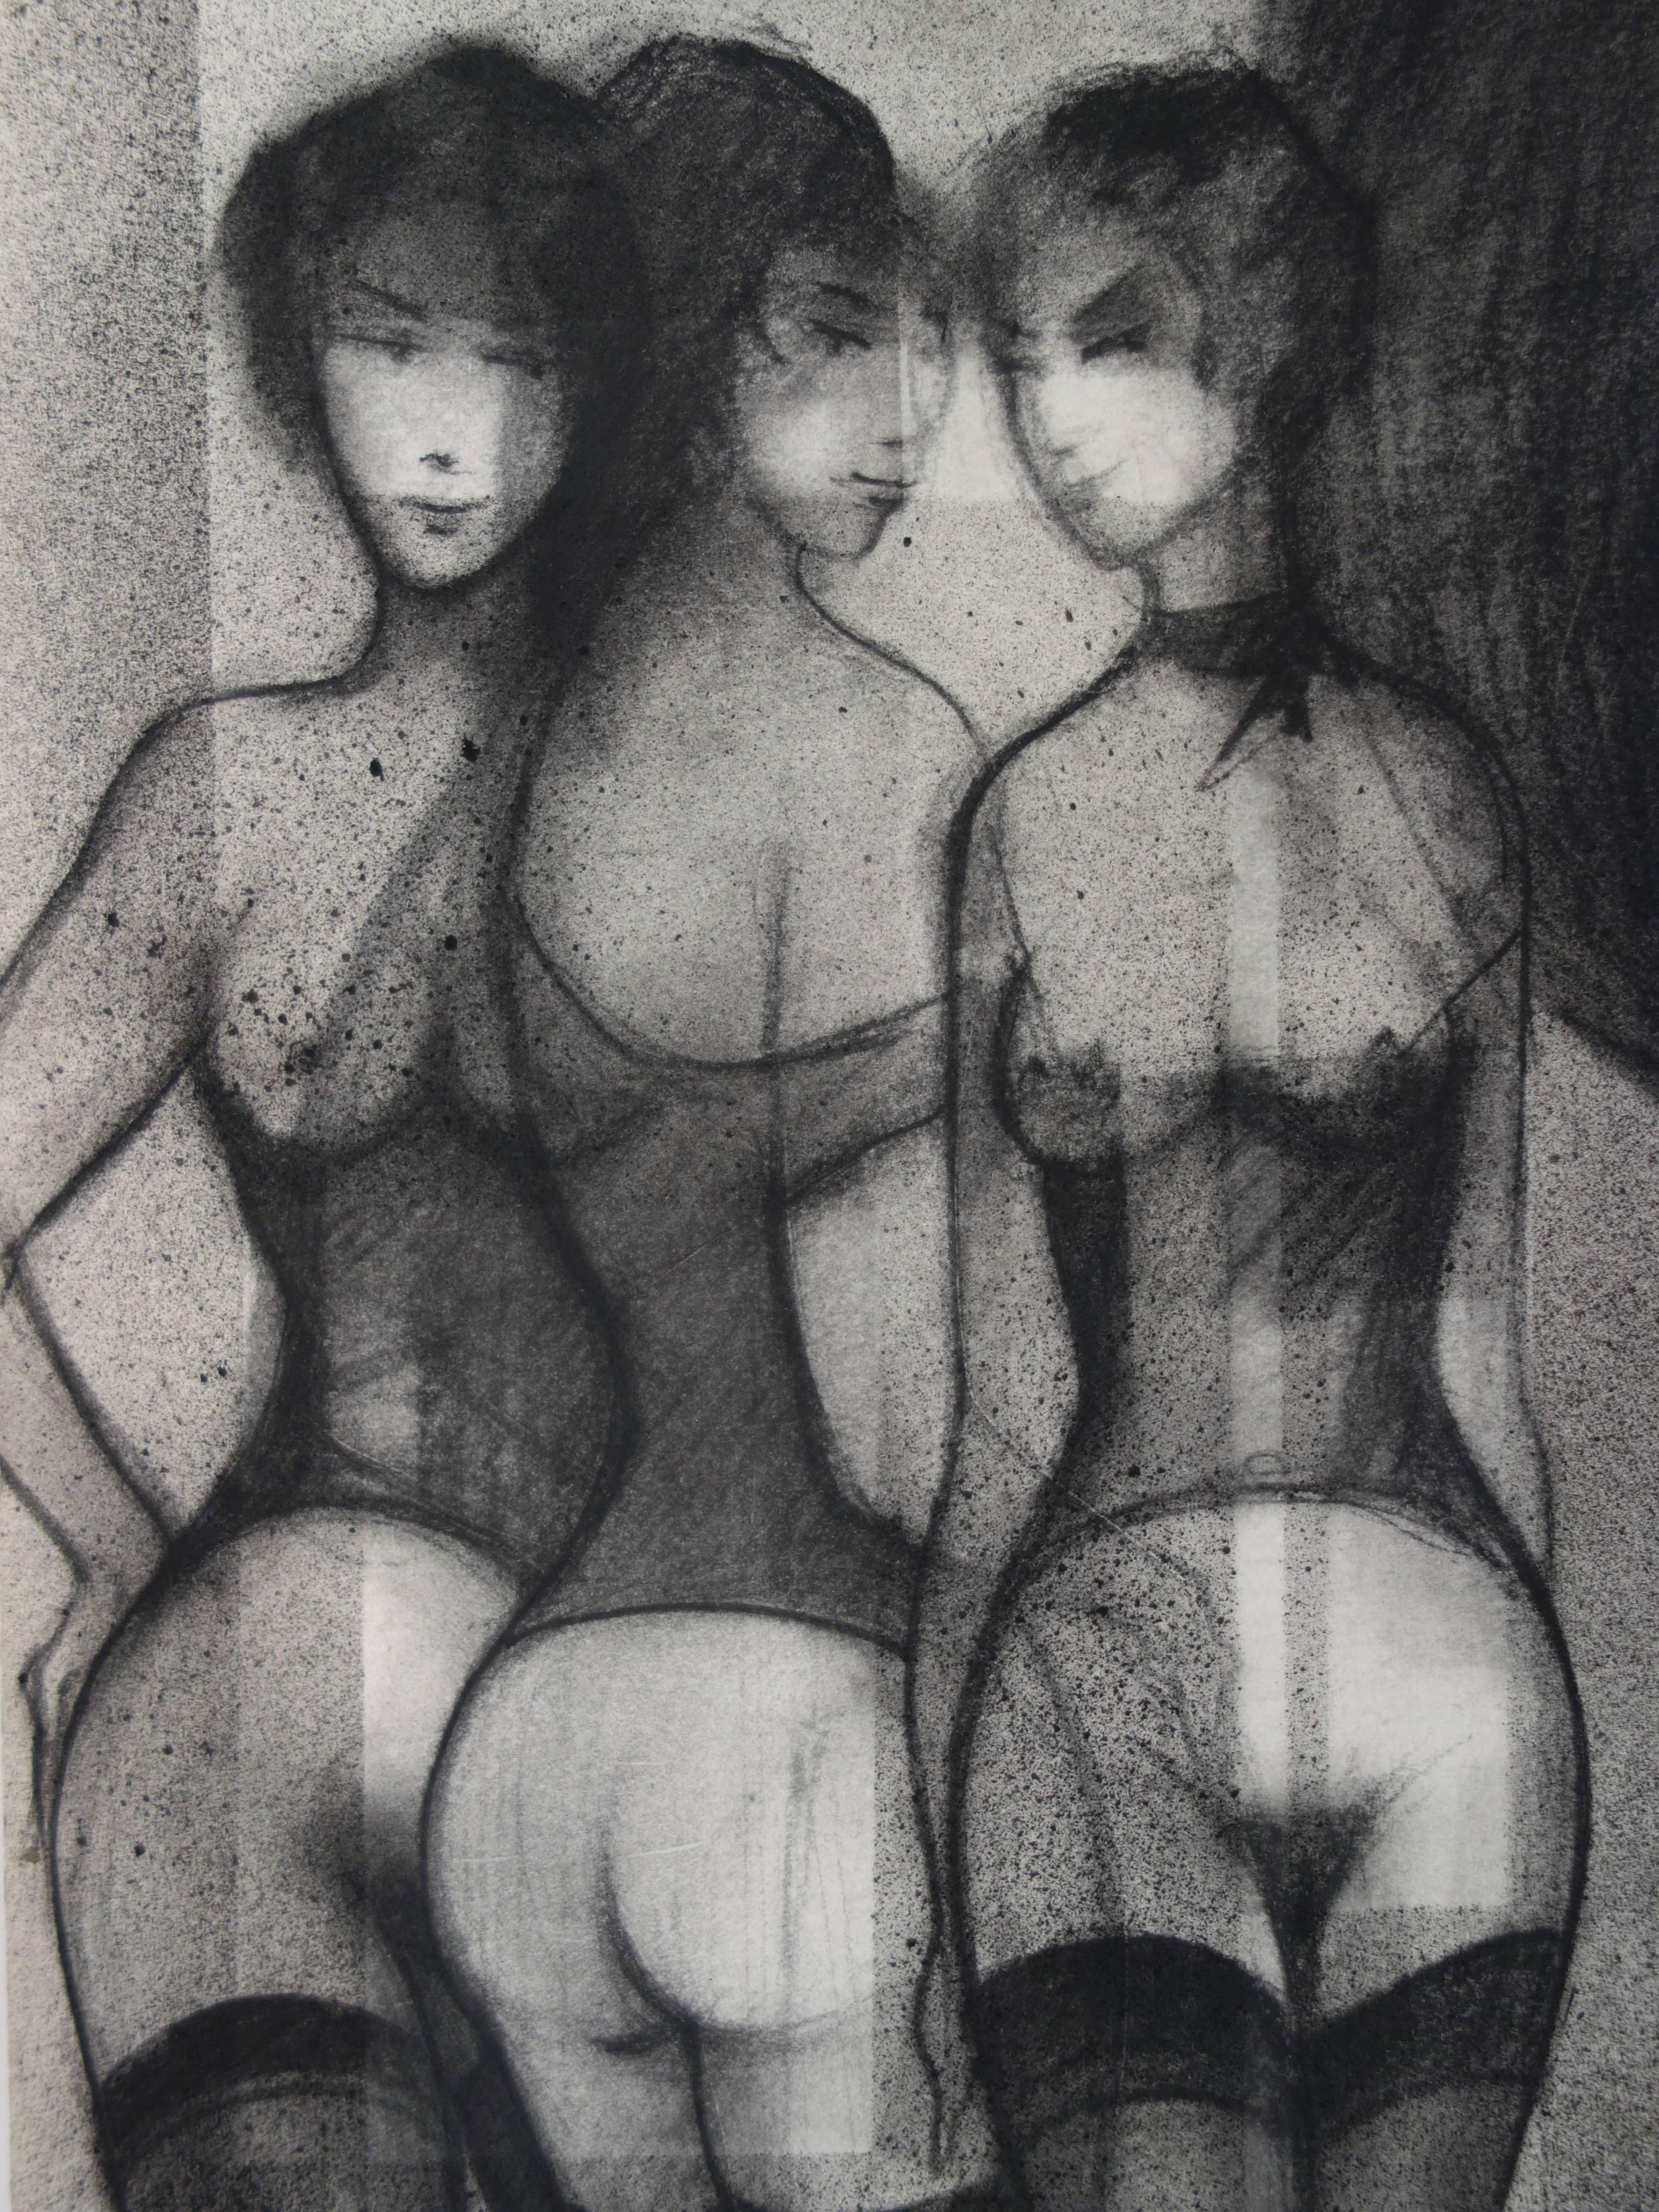 Sacha CHIMKEVITCH (1920-2006)
The Three Graces with Garters, 1991

Original charcoals drawing
Signed and dated bottom left
On vellum 54 x 21 cm (c. 22 x 8